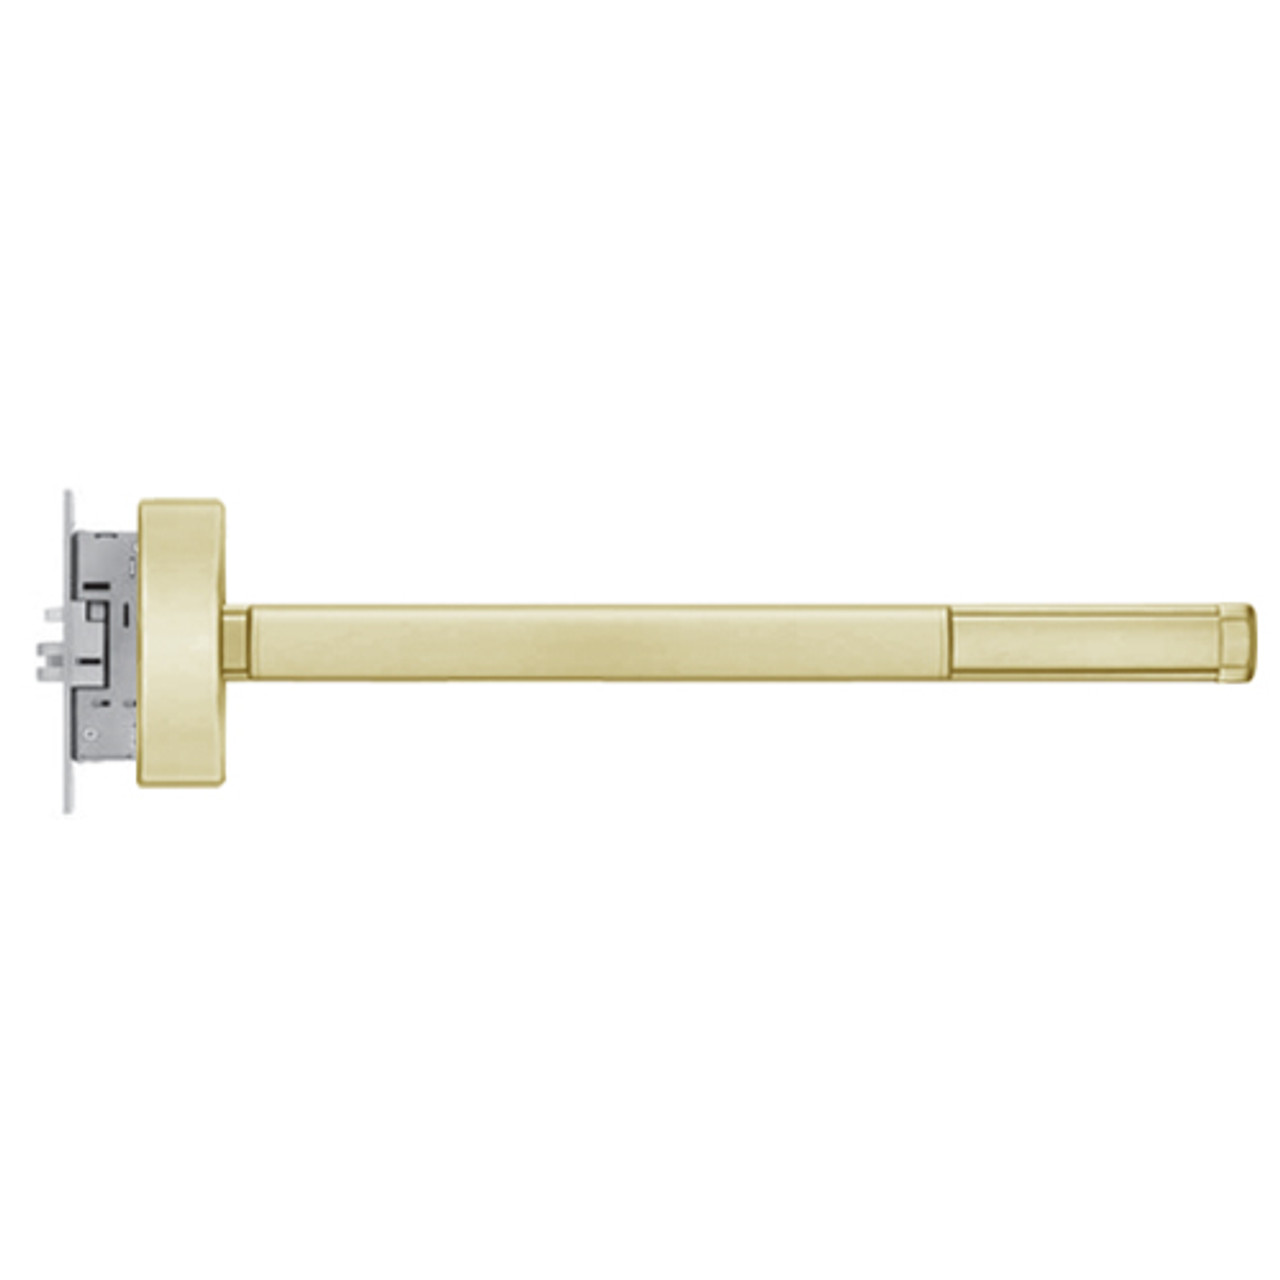 MLR2301-LHR-606-36 PHI 2300 Series Apex Mortise Exit Device with Motorized Latch Retraction Prepped for Cover Plate in Satin Brass Finish